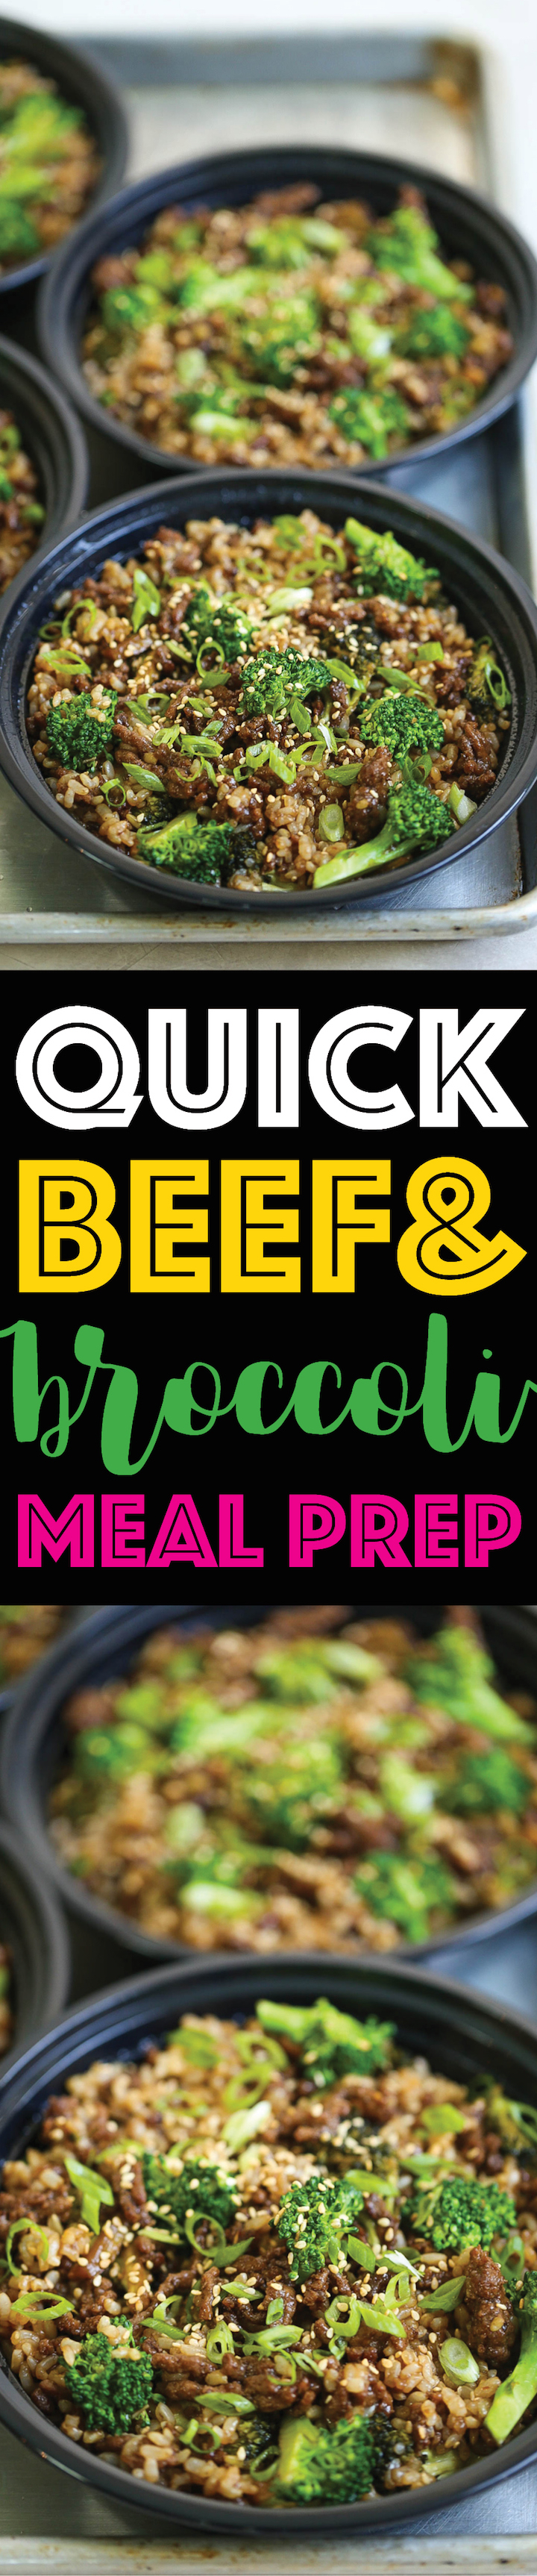 https://s23209.pcdn.co/wp-content/uploads/2017/06/Quick-Beef-and-Broccoli-Meal-Prep.jpg